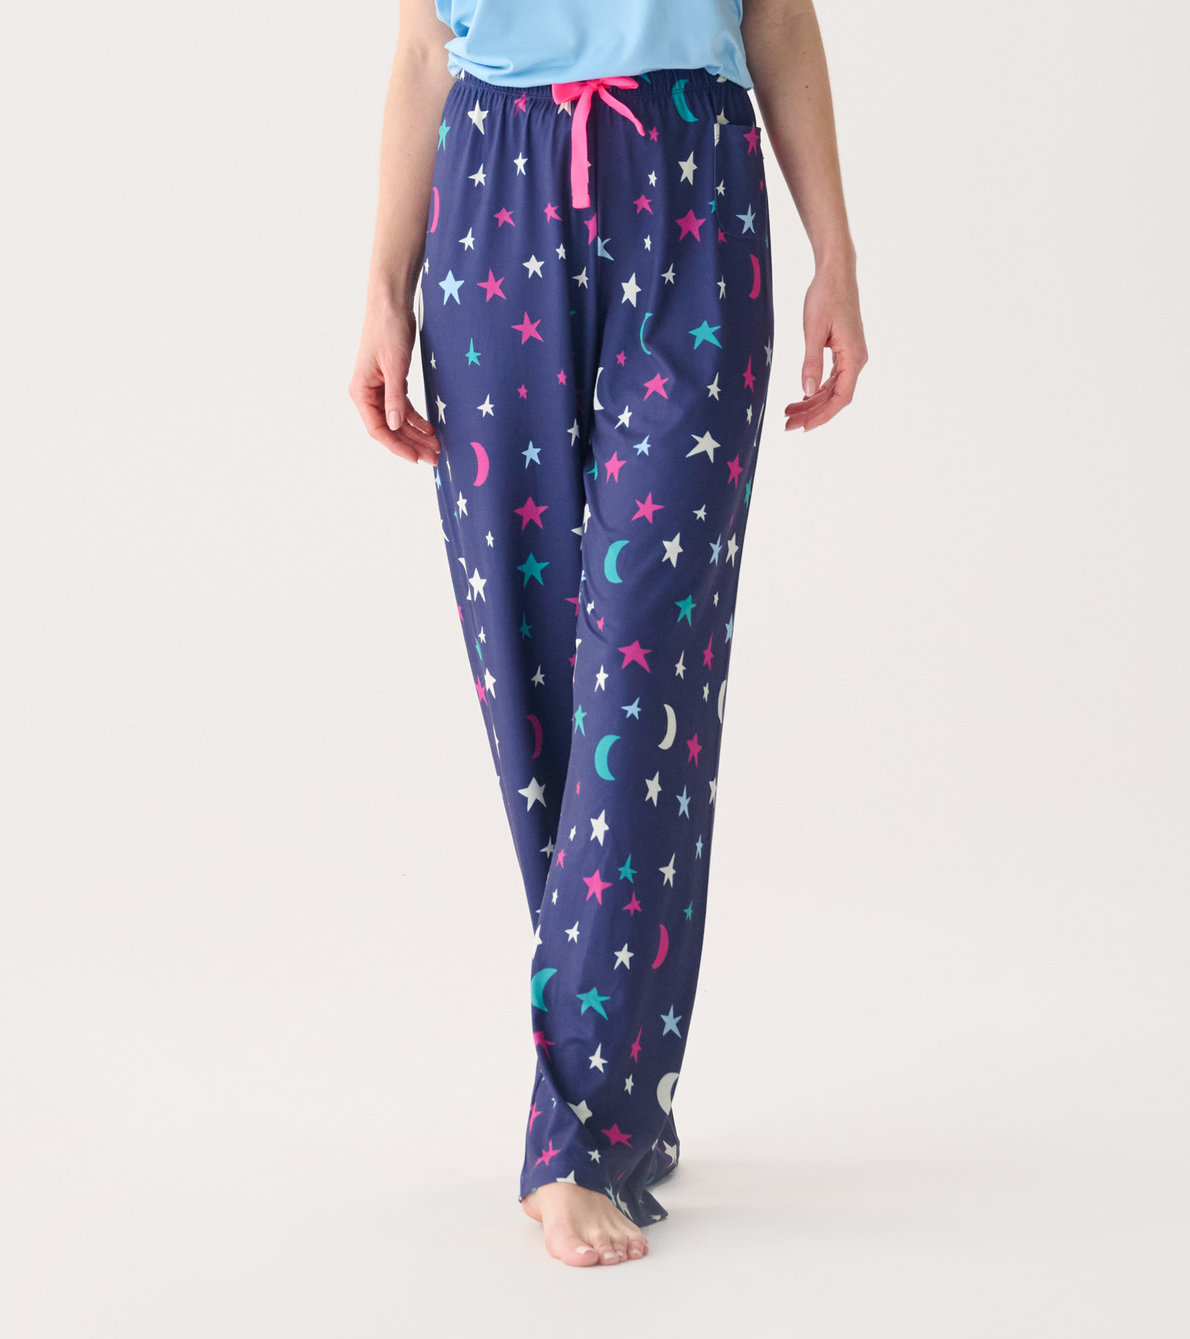 View larger image of Capelton Road Women's Starry Night Pajama Pants